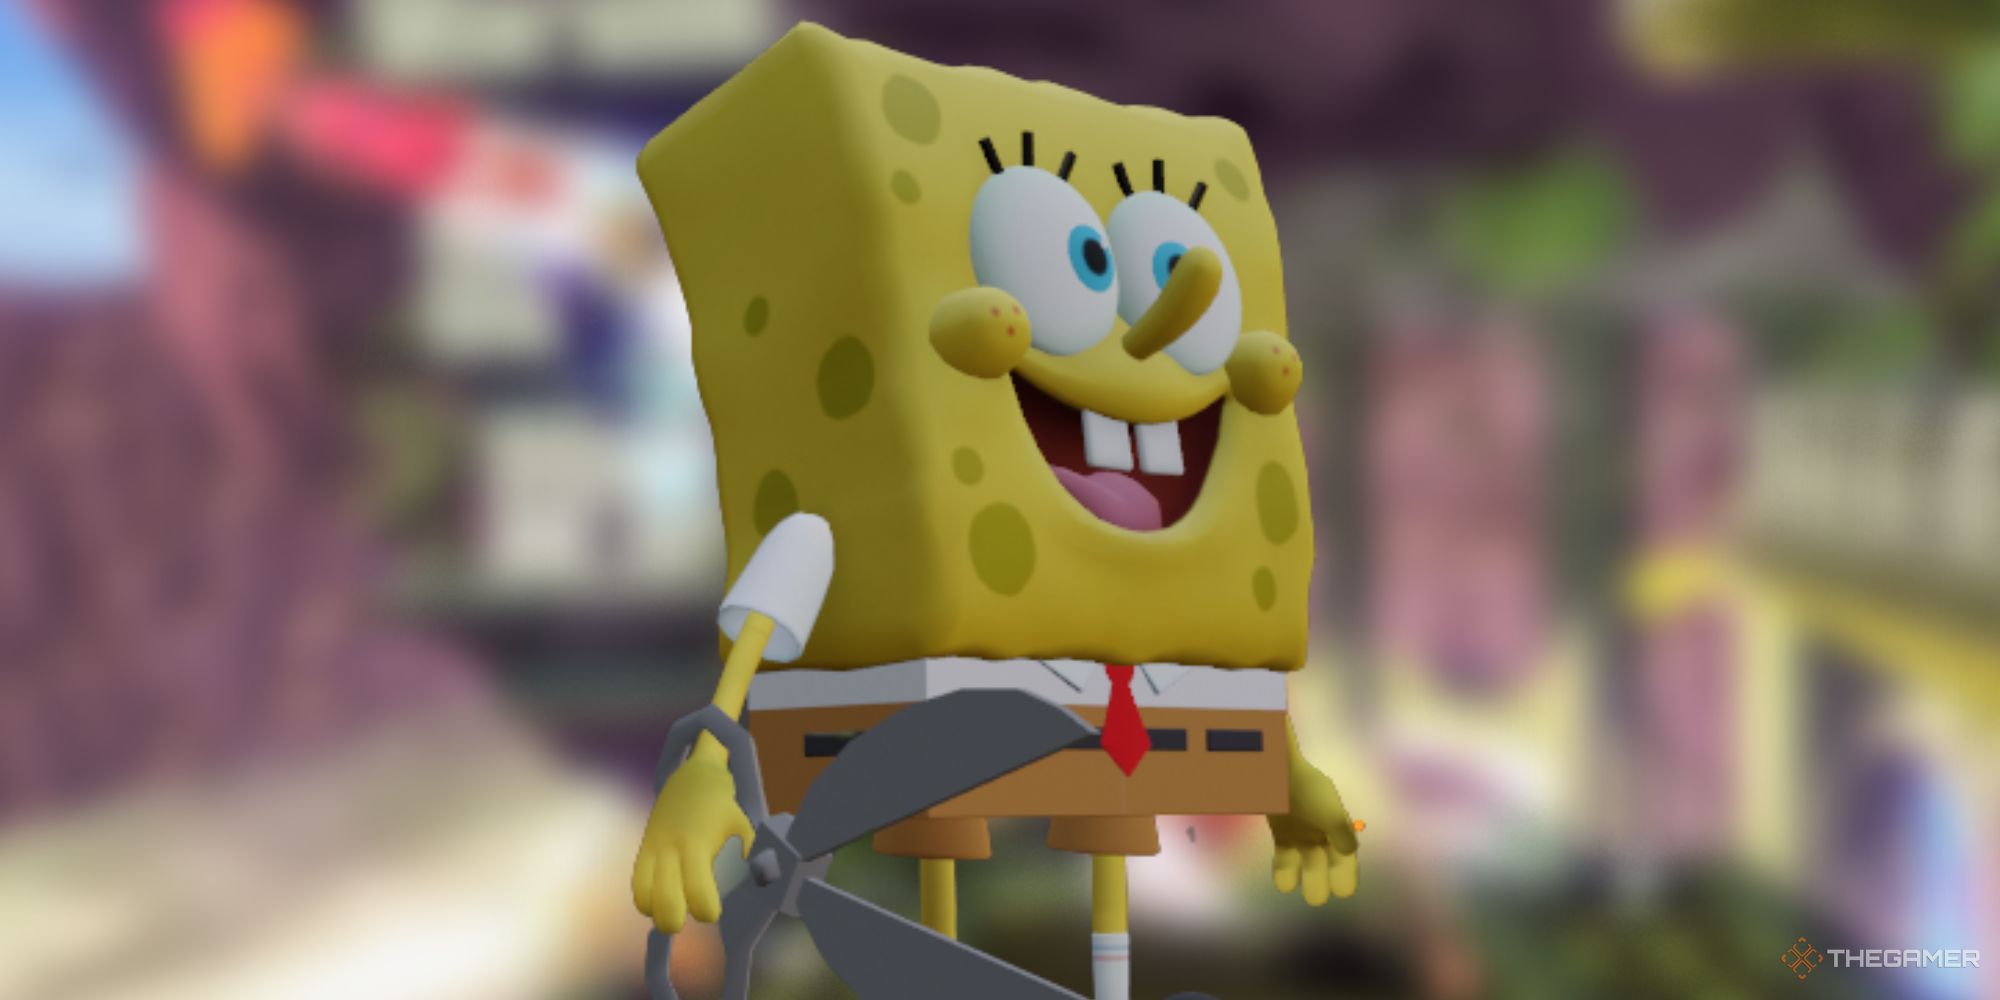 SpongeBob holds some scissors in front of a blurry, colourful background